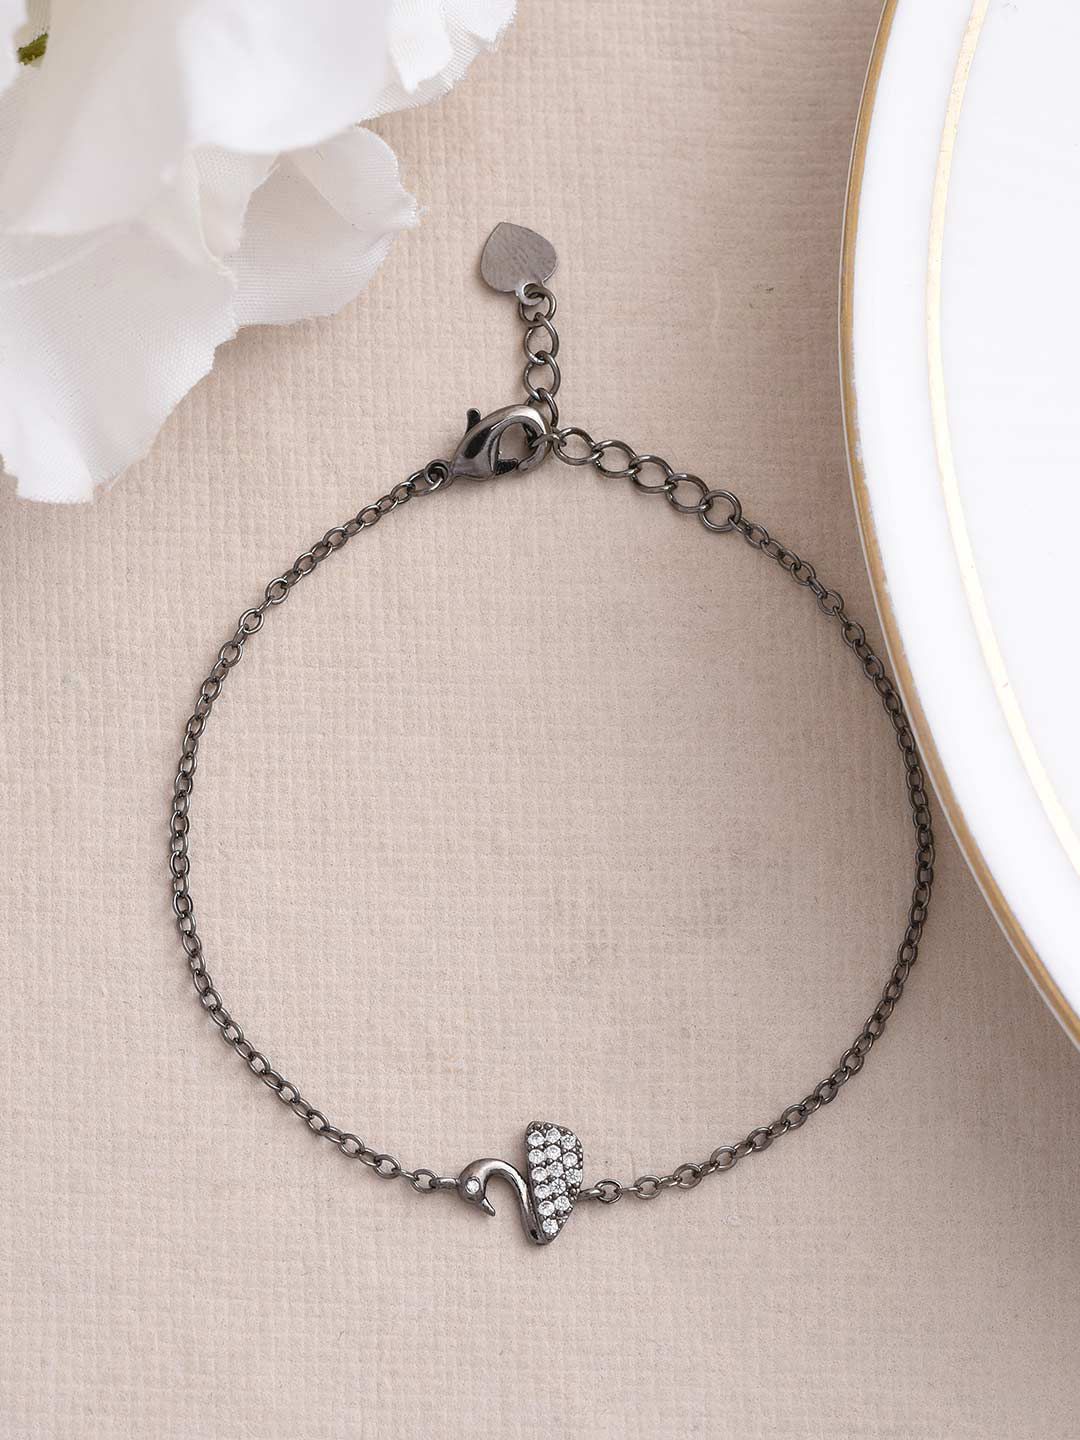 Tistabene Women Rhodium-Plated Silver-Toned & White Charm Bracelet Price in India